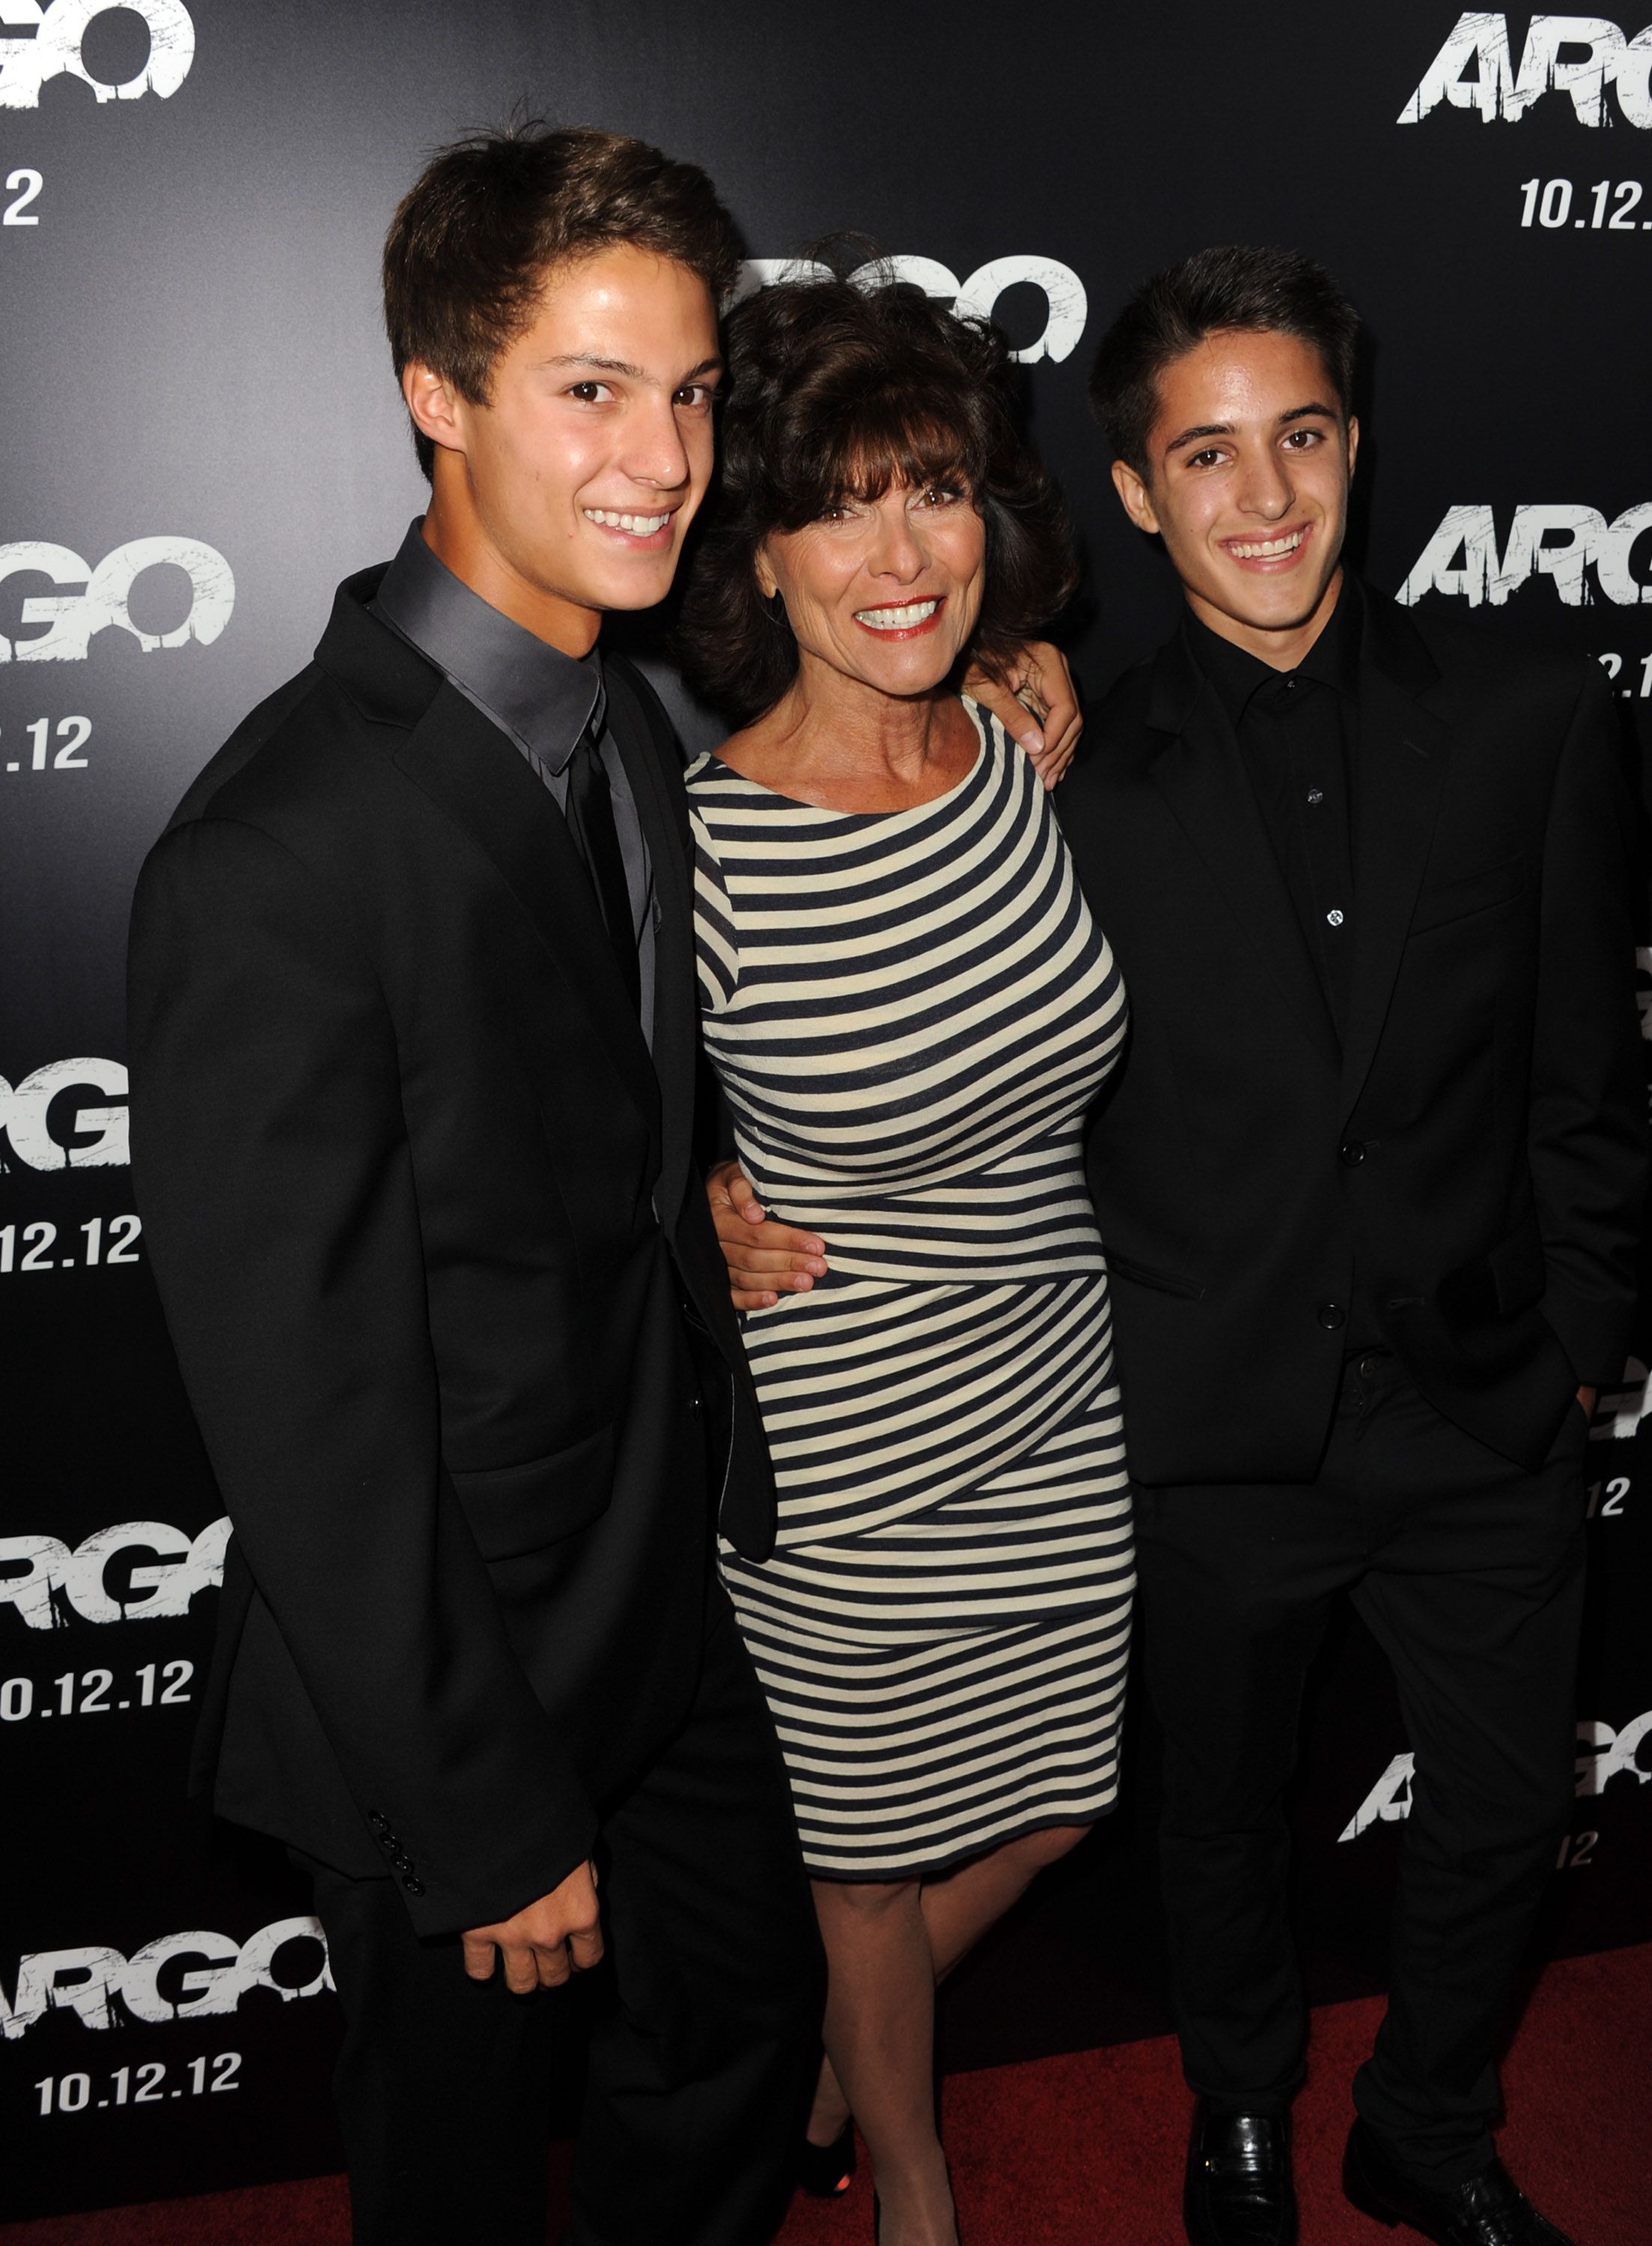 Adrienne Barbeau with William and Walker at AMPAS Samuel Goldwyn Theater on October 4, 2012 in Beverly Hills, California. | Photo: Getty Images